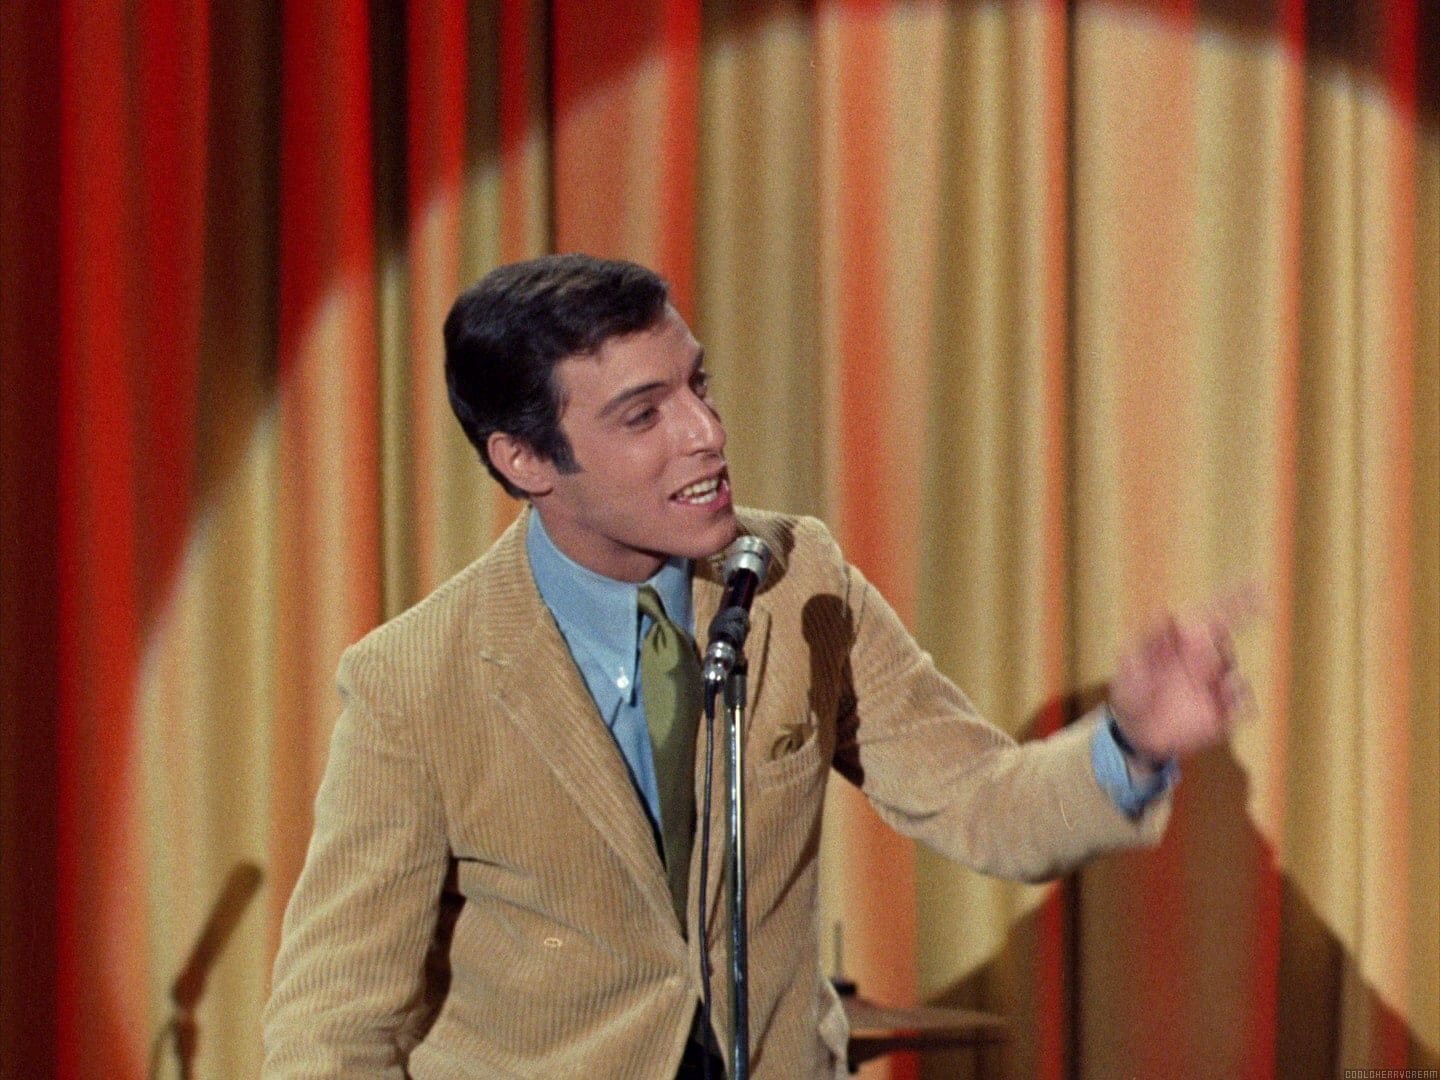 Jerry appearing on The Monkees prime time television show in 1966.